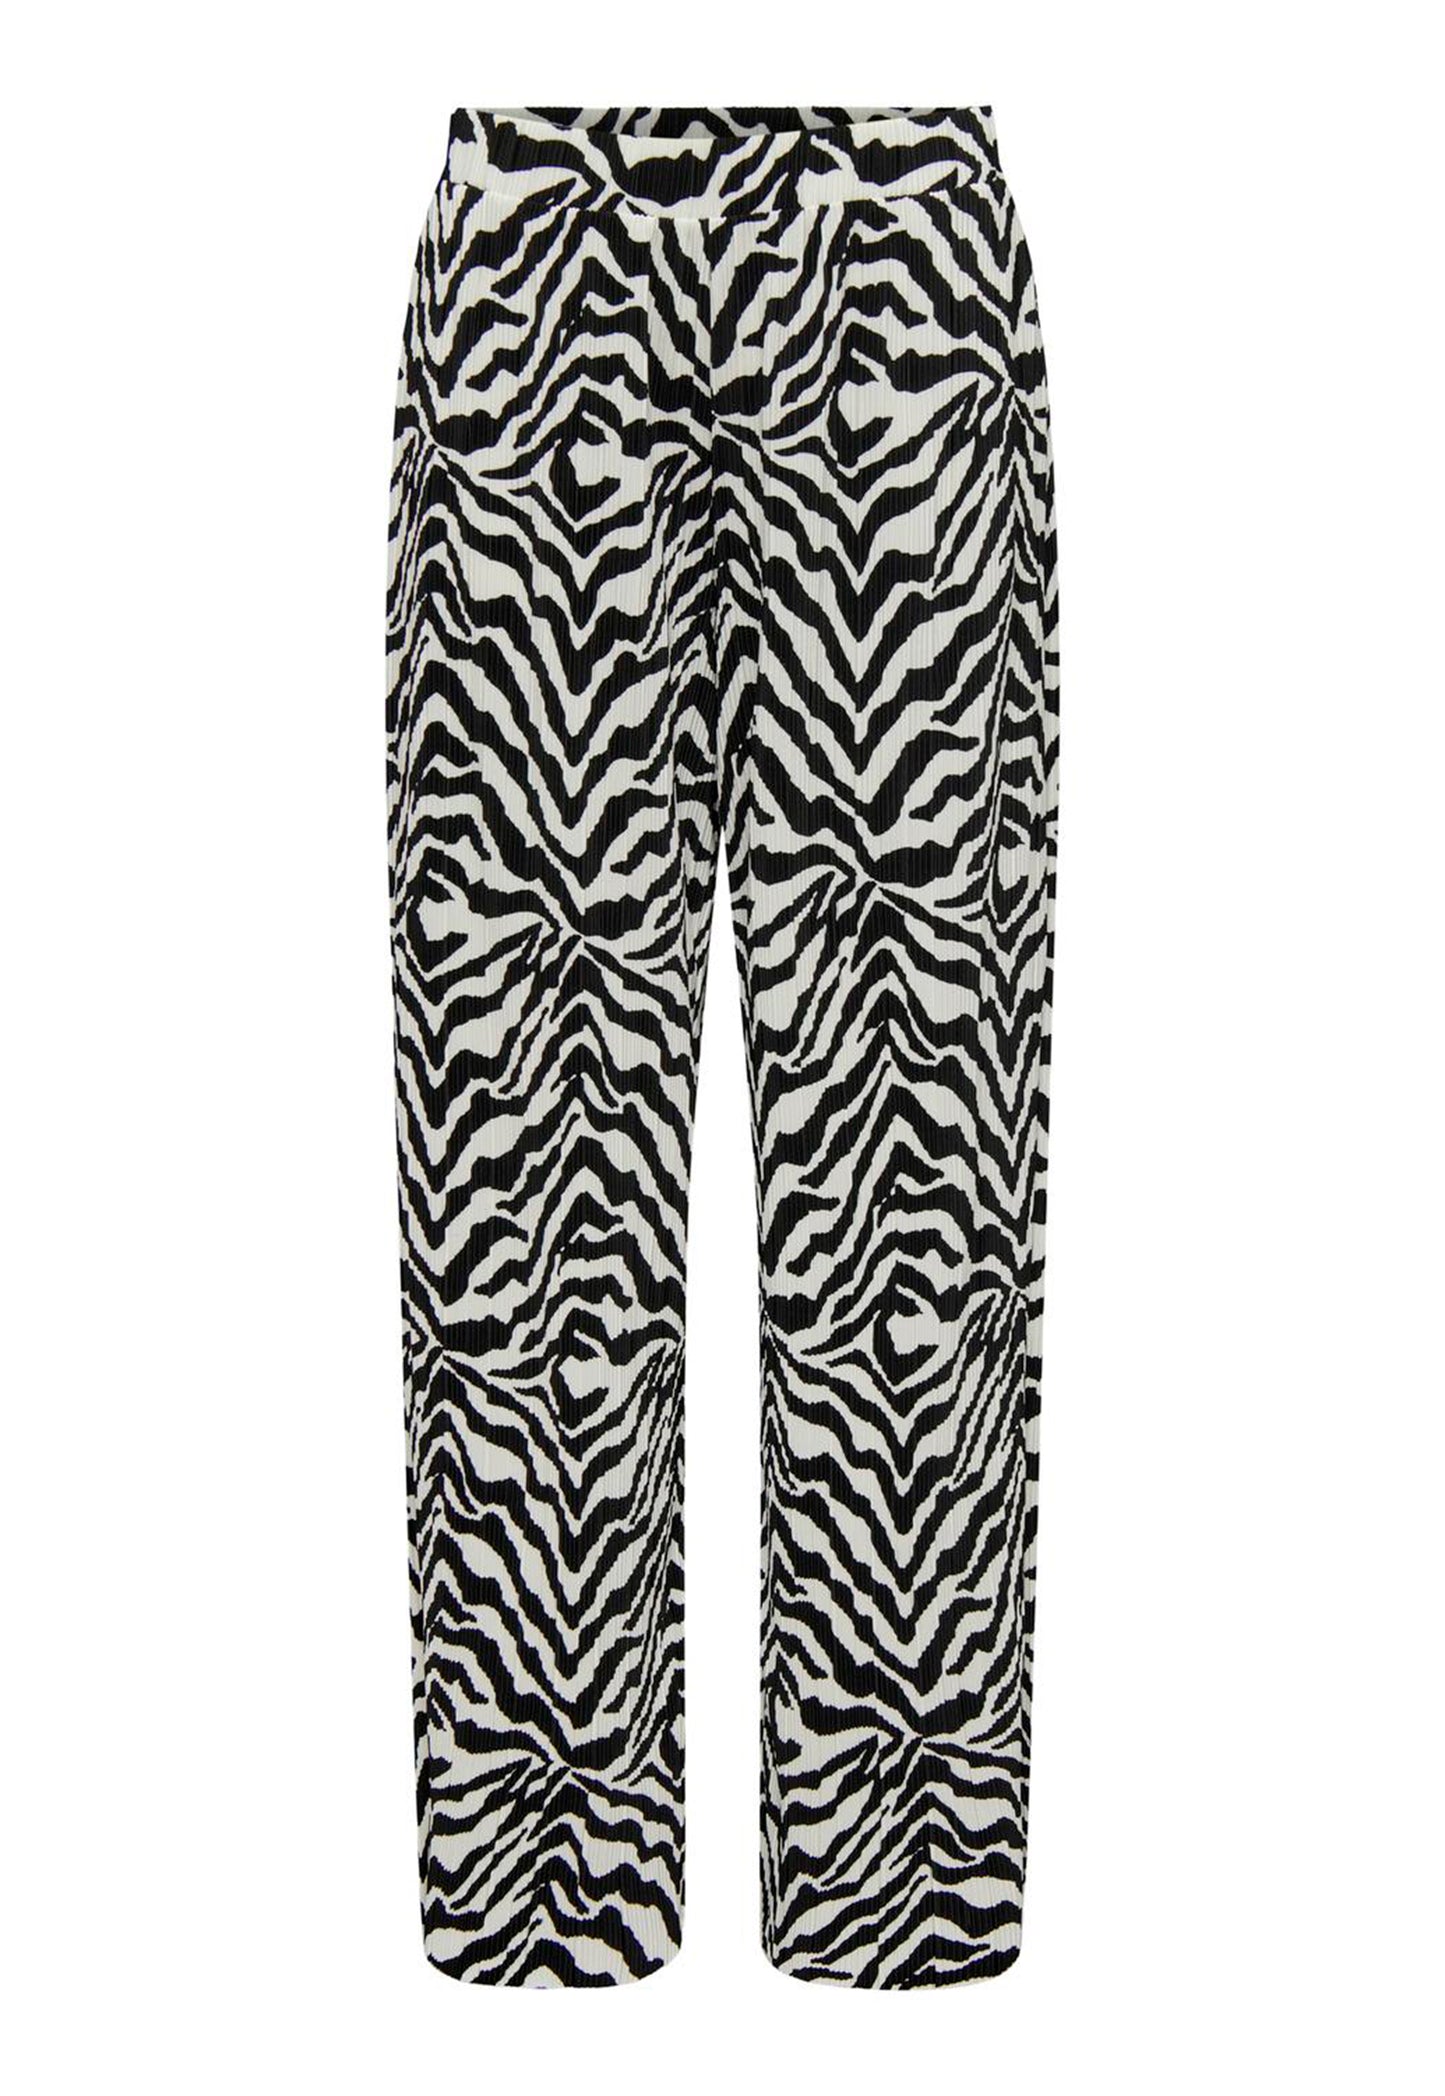 
                  
                    JDY Bravo Zebra Print Plisse Wide Leg Relaxed Trousers in Black & Cream - One Nation Clothing
                  
                